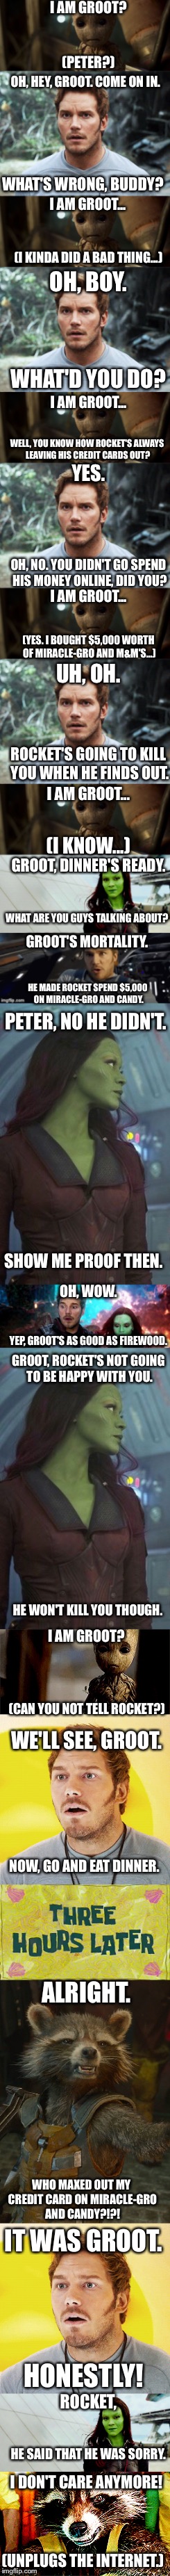 Groot's Internet Adventures  | I AM GROOT? (PETER?); OH, HEY, GROOT. COME ON IN. WHAT'S WRONG, BUDDY? I AM GROOT... (I KINDA DID A BAD THING...); OH, BOY. WHAT'D YOU DO? I AM GROOT... WELL, YOU KNOW HOW ROCKET'S ALWAYS LEAVING HIS CREDIT CARDS OUT? YES. OH, NO. YOU DIDN'T GO SPEND HIS MONEY ONLINE, DID YOU? I AM GROOT... (YES. I BOUGHT $5,000 WORTH OF MIRACLE-GRO AND M&M'S...); UH, OH. ROCKET'S GOING TO KILL YOU WHEN HE FINDS OUT. I AM GROOT... (I KNOW...); GROOT, DINNER'S READY. WHAT ARE YOU GUYS TALKING ABOUT? GROOT'S MORTALITY. HE MADE ROCKET SPEND $5,000 ON MIRACLE-GRO AND CANDY. PETER, NO HE DIDN'T. SHOW ME PROOF THEN. OH, WOW. YEP, GROOT'S AS GOOD AS FIREWOOD. GROOT, ROCKET'S NOT GOING TO BE HAPPY WITH YOU. HE WON'T KILL YOU THOUGH. I AM GROOT? (CAN YOU NOT TELL ROCKET?); WE'LL SEE, GROOT. NOW, GO AND EAT DINNER. ALRIGHT. WHO MAXED OUT MY CREDIT CARD ON MIRACLE-GRO AND CANDY?!?! IT WAS GROOT. HONESTLY! ROCKET, HE SAID THAT HE WAS SORRY. I DON'T CARE ANYMORE! (UNPLUGS THE INTERNET.) | image tagged in groot,rocket,gamora,starlord,memes | made w/ Imgflip meme maker